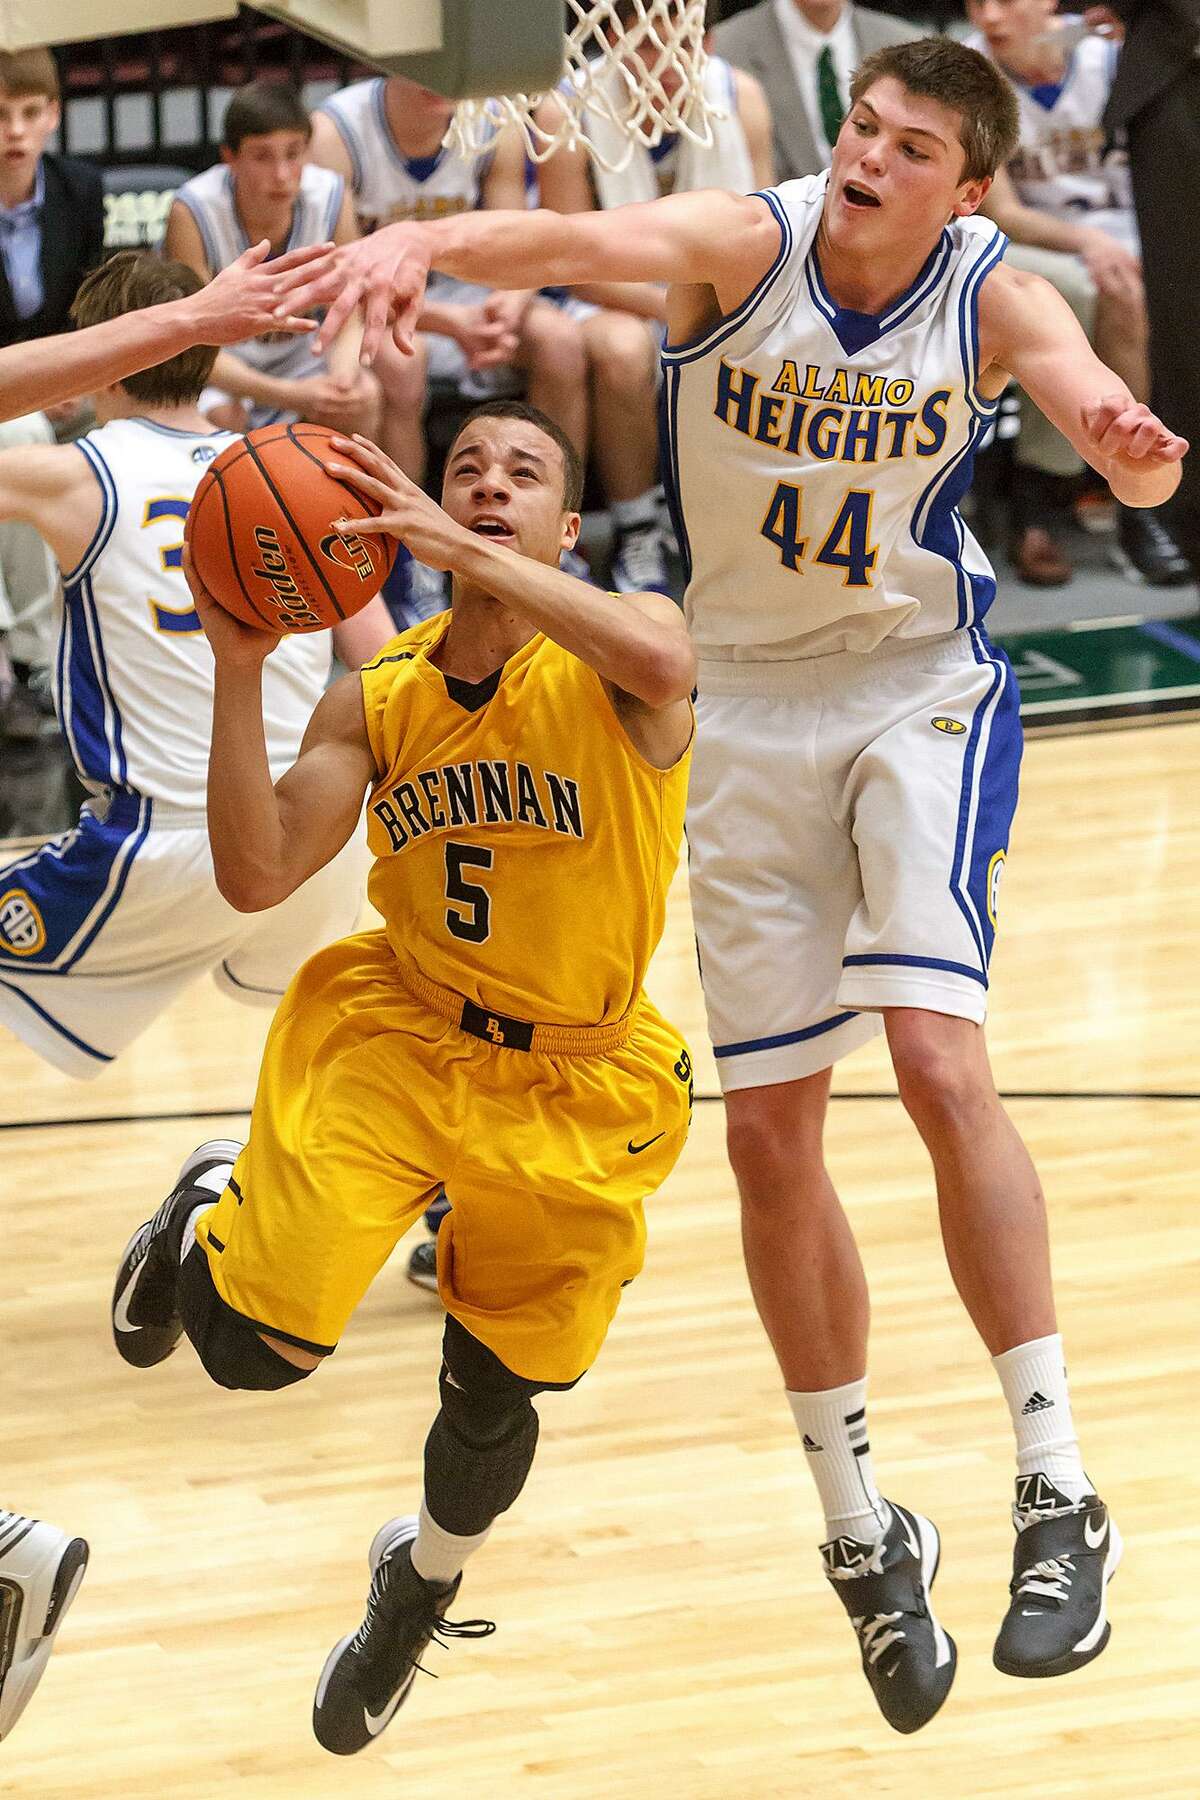 Alamo Heights' Ben Lammers (44), shown here in the 2013 Region IV-4A final vs. Brennan’s John Azzinaro (left), will participate in the NBA's Charlotte Hornets' mini-camp next week in Las Vegas.